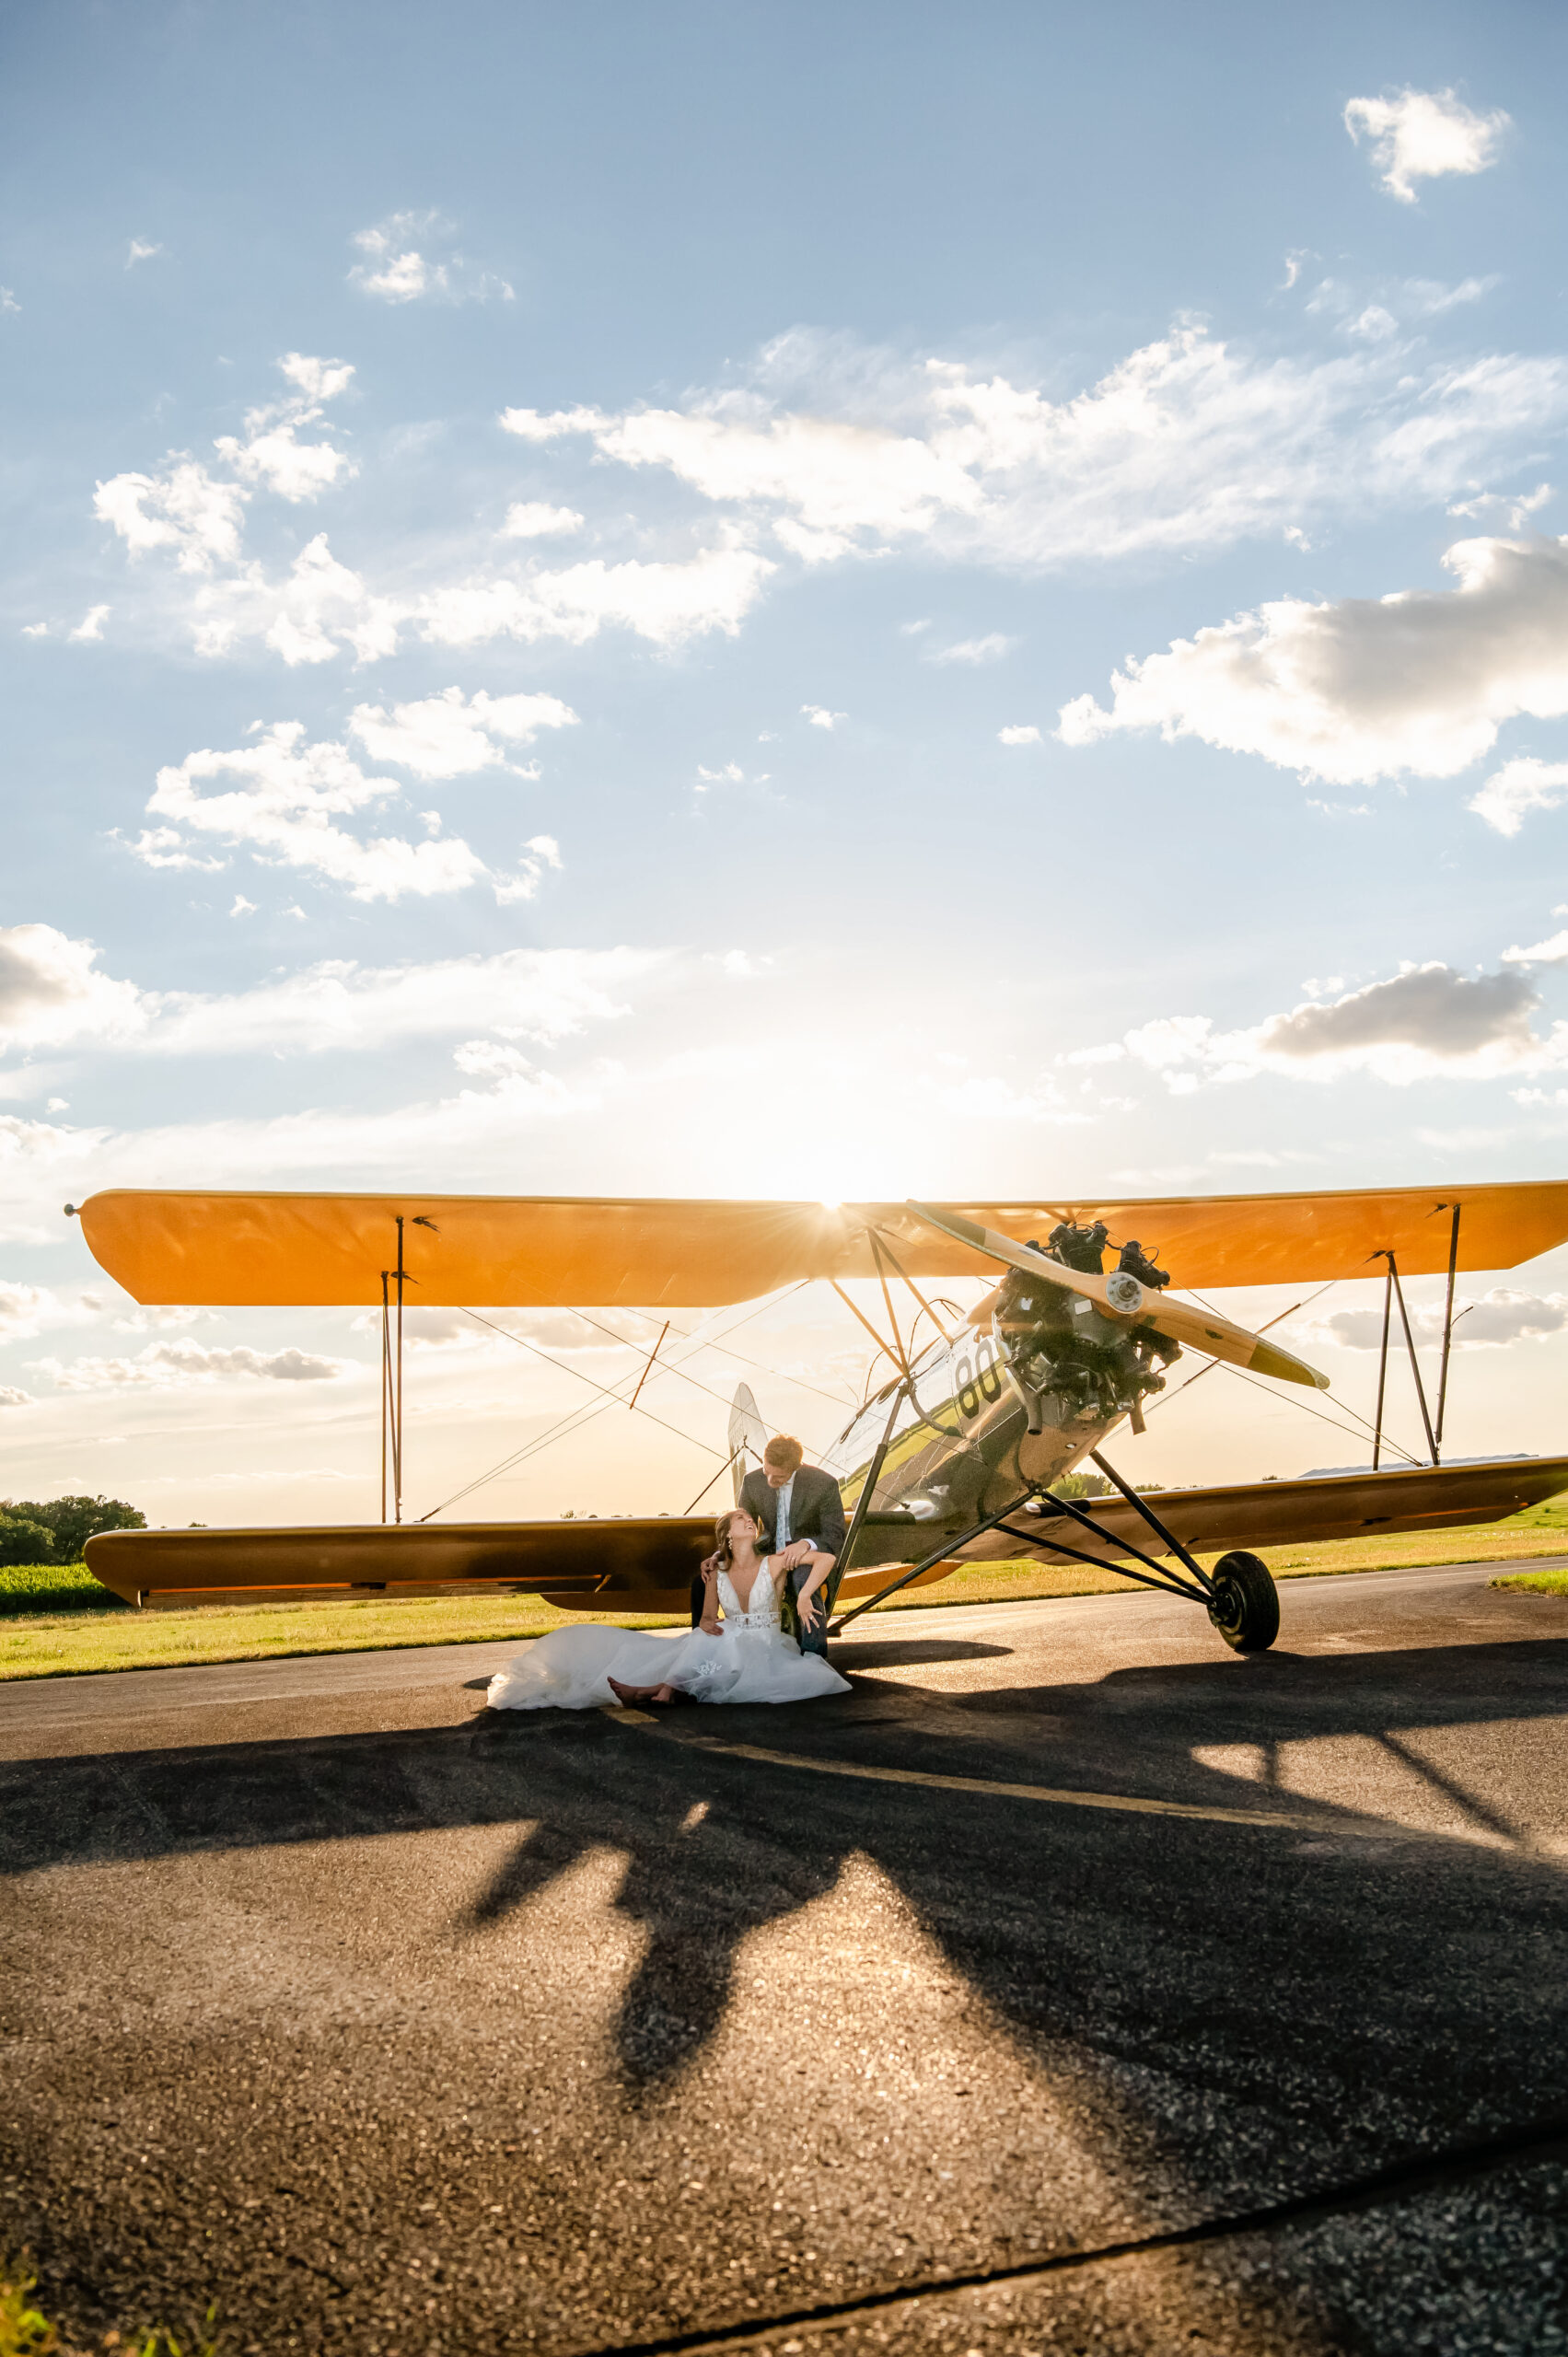 image of sunset behind airplane of wedding couple for destination elopement wedding photography _ captured by caitlin anne photos for joyfille stories